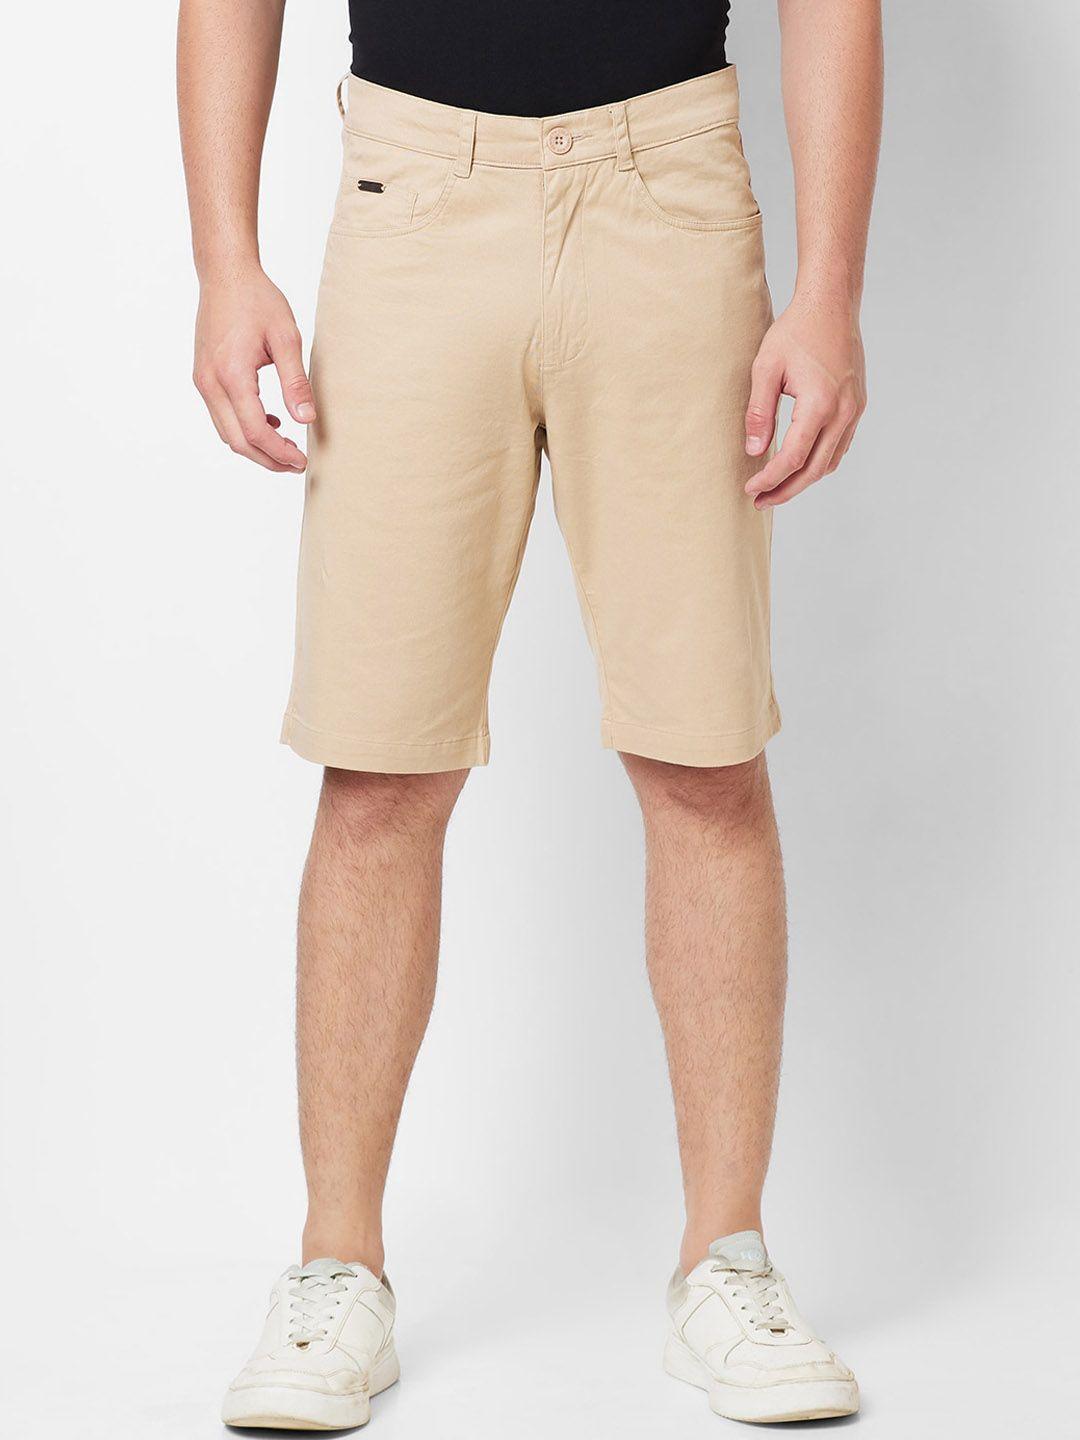 kenneth-cole-men-mid-rise-clean-look-pure-cotton-shorts